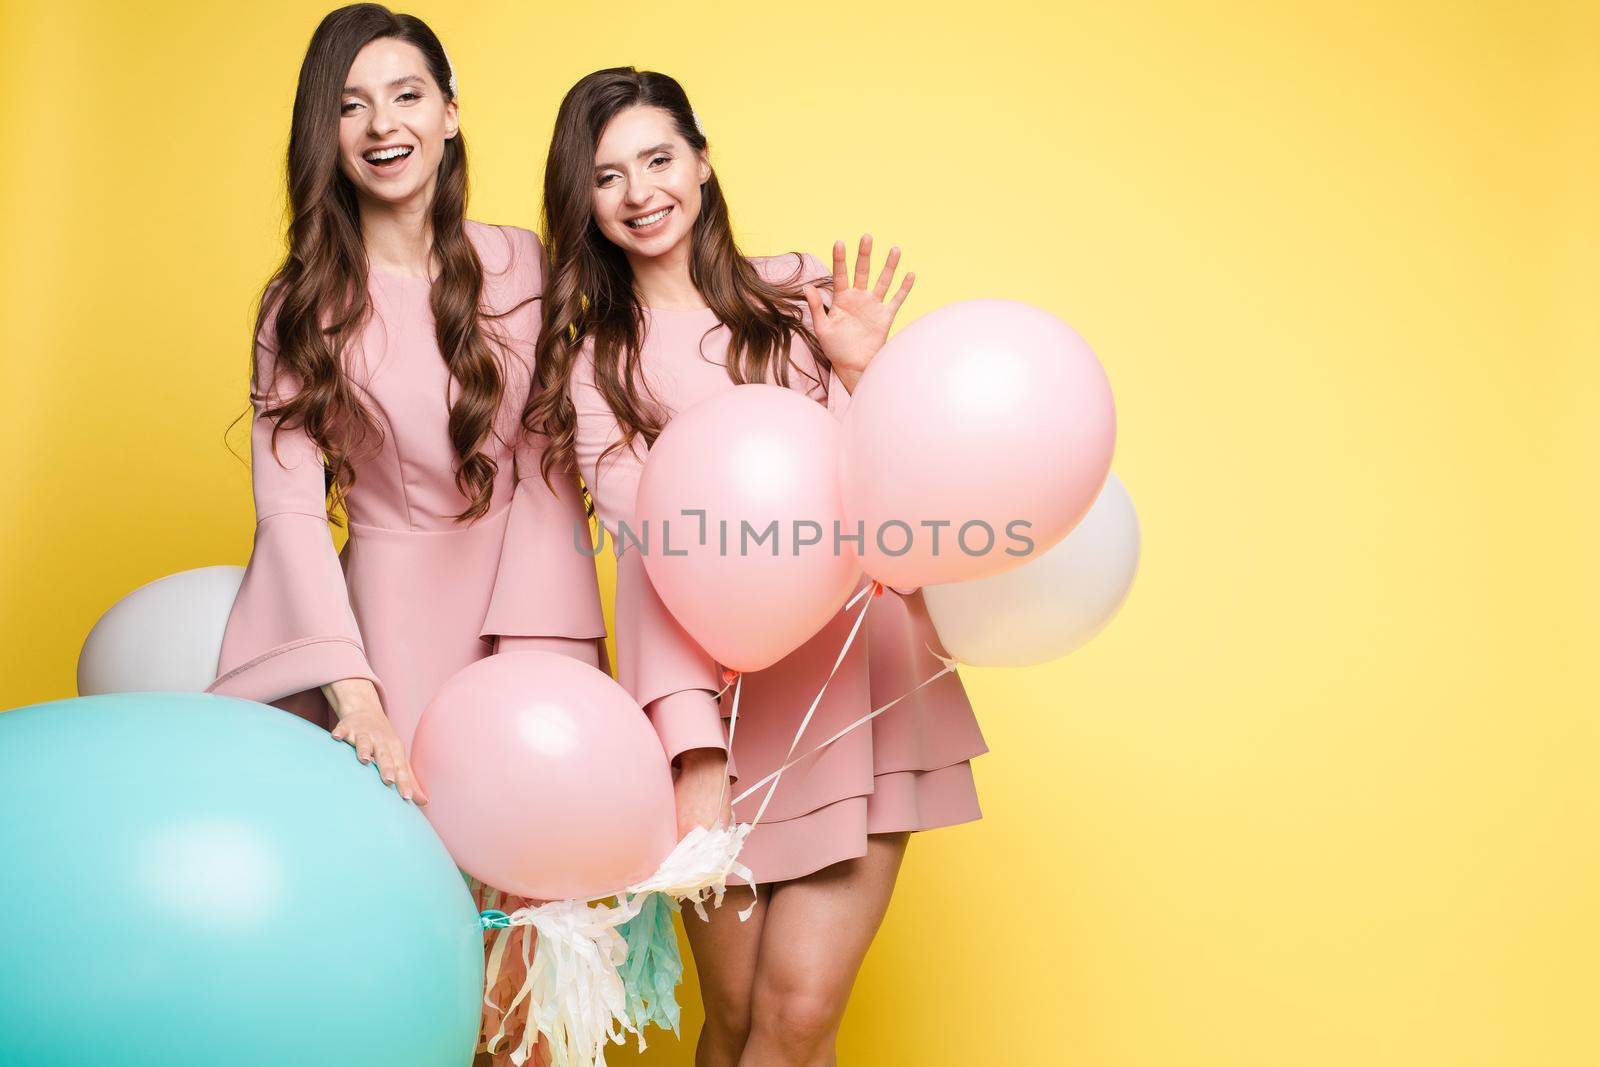 Studio portrait of gorgeous brunette twins posing in trendy elegant pink dresses. Stylish outlooks. Smiling at camera. Yellow background with mint and pink air balloons.